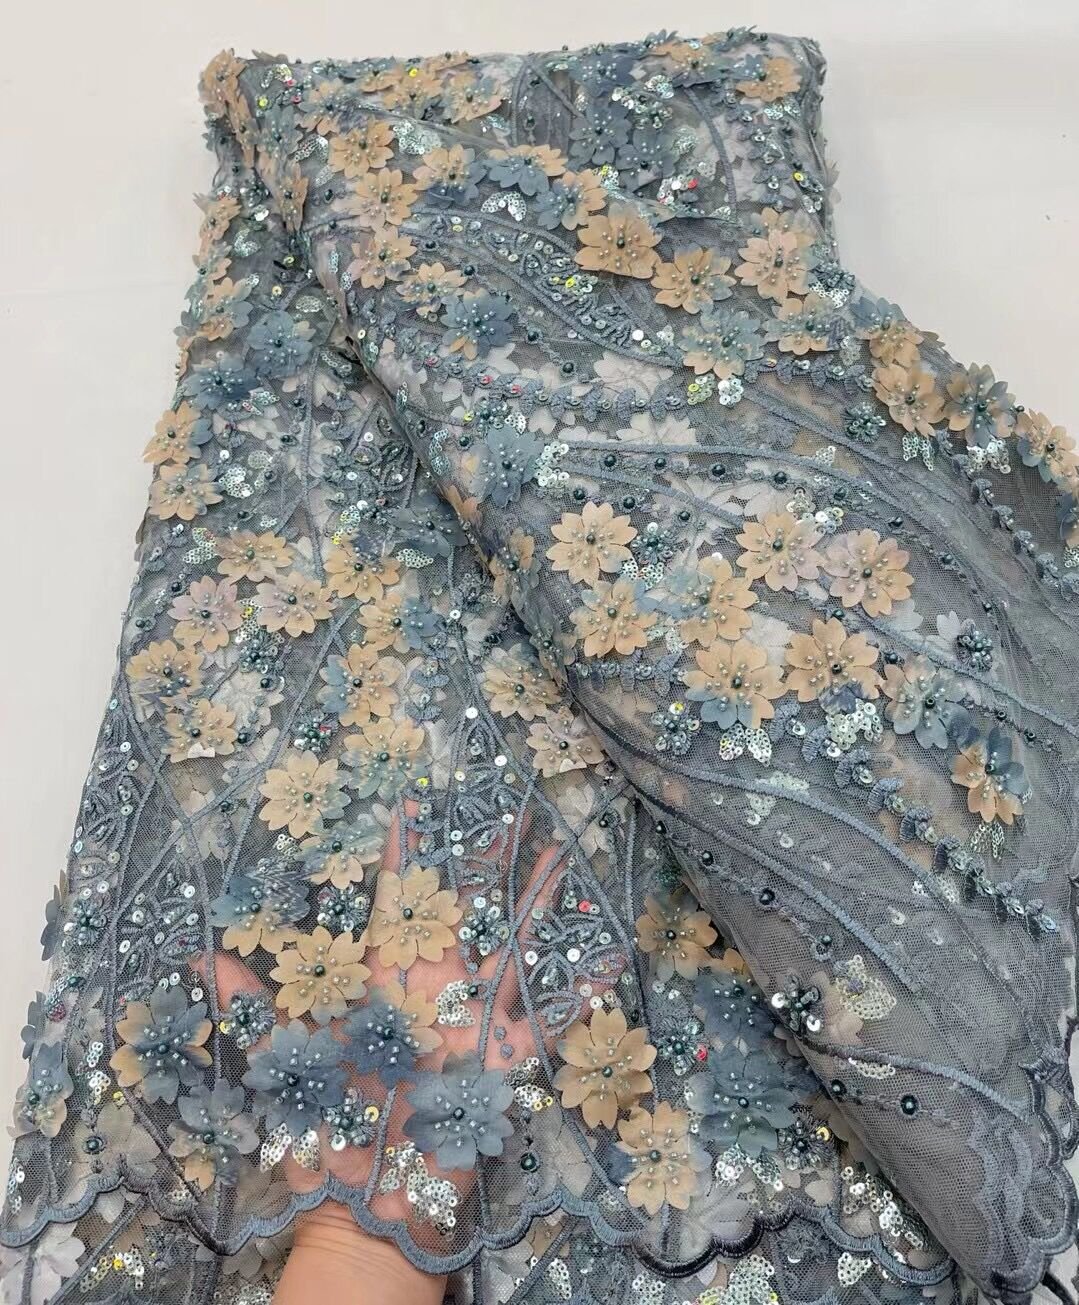 5 YARDS / 15 COLORS / Ombre Floral Sequin Beaded Embroidery Glitter Mesh Lace Wedding Party Dress Fabric - Classic & Modern